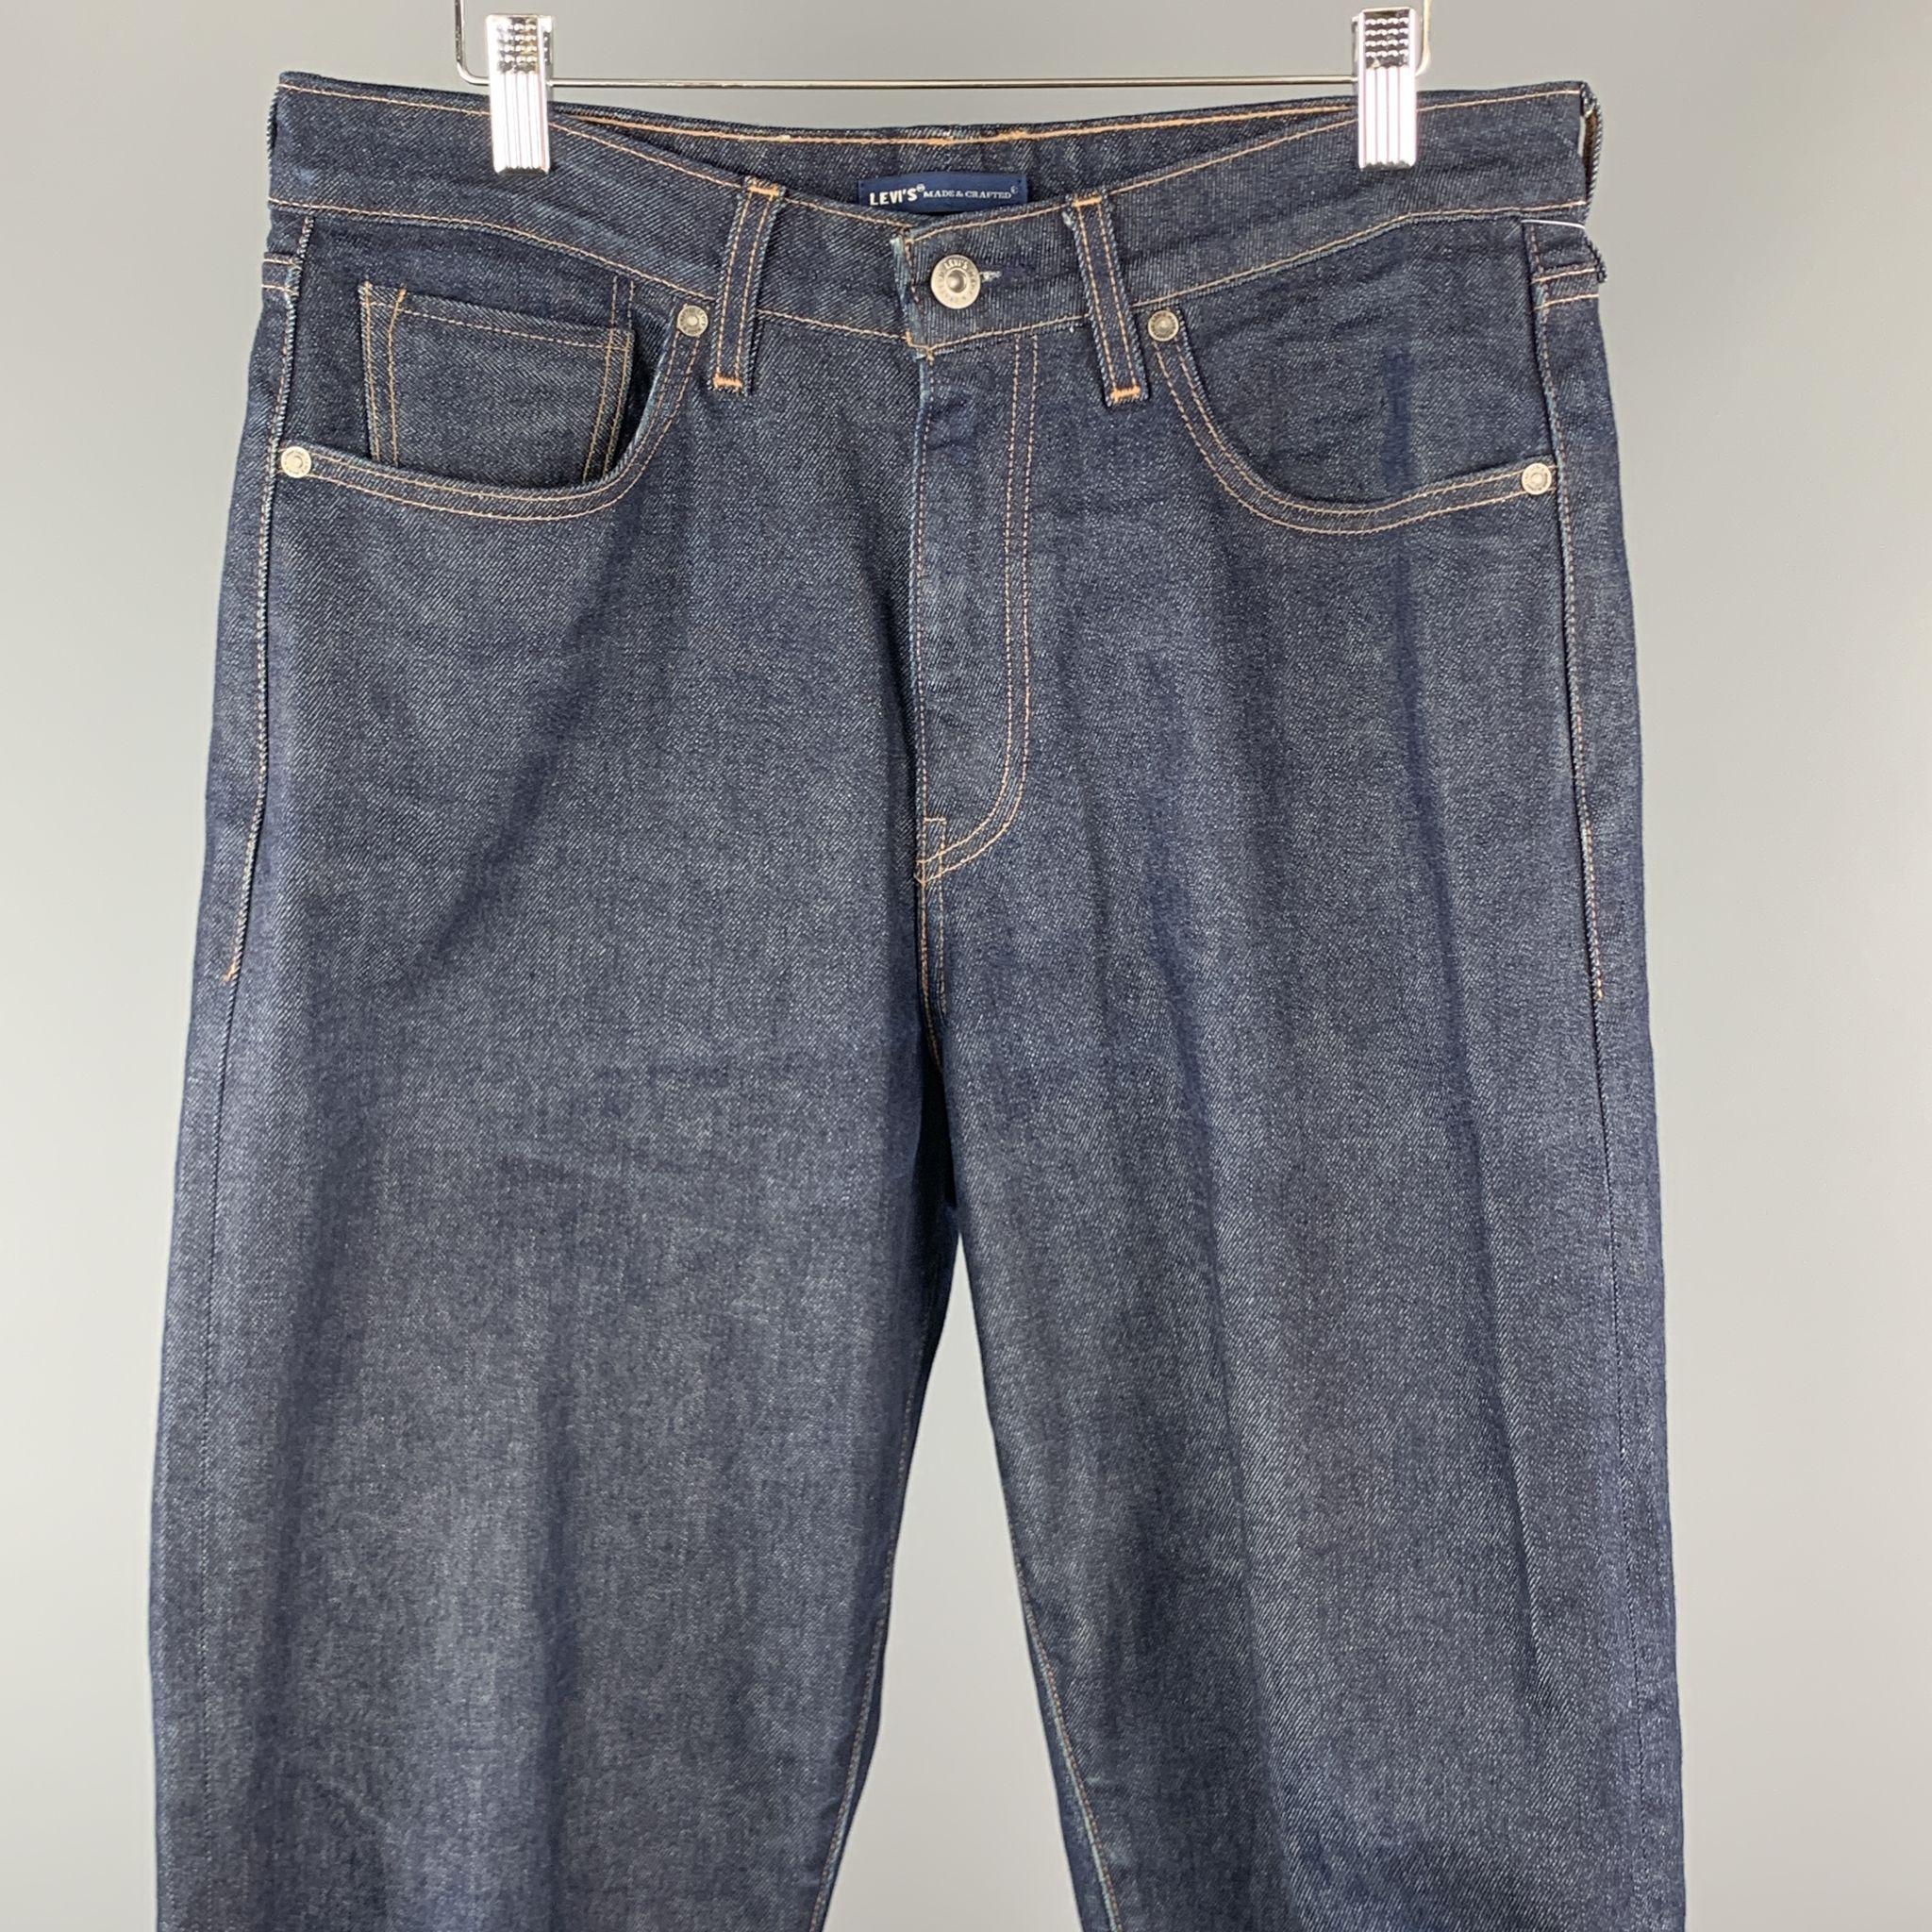 LEVI'S MADE & CRAFTED Jeans comes in a indigo washed selvedge denim featuring a cropped style and a zip fly closure. 

Excellent Pre-Owned Condition.
Marked: 32

Measurements:

Waist: 32 in. 
Rise: 12 in. 
Inseam: 23 in. 

SKU: 98217
Category: